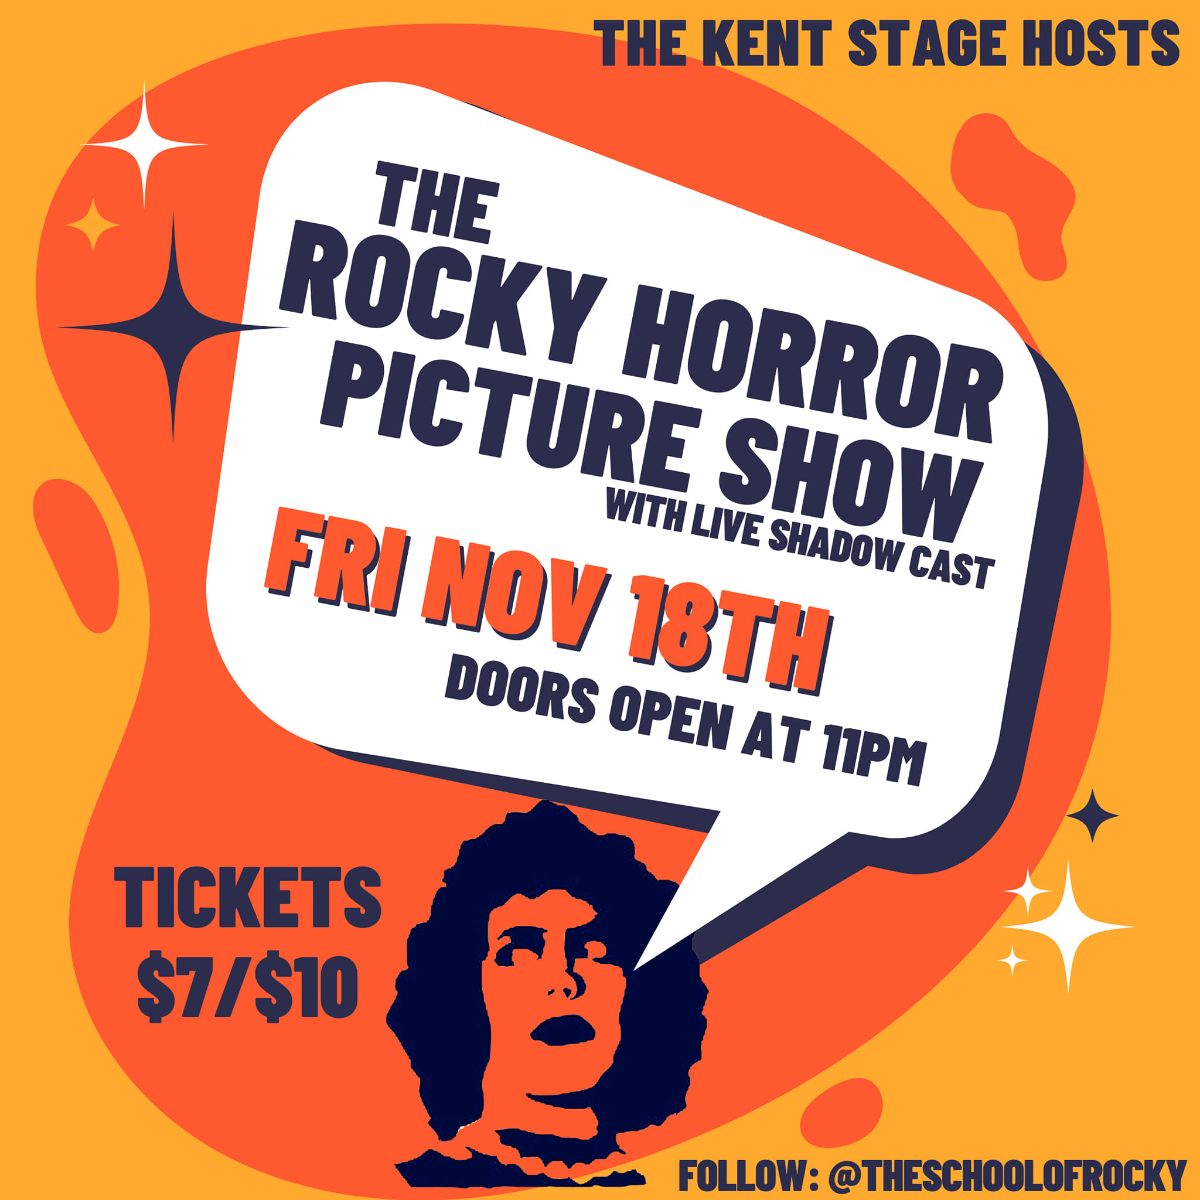 Rocky Horror Picture Show - Thanksgiving "Feast" | Kent Stage